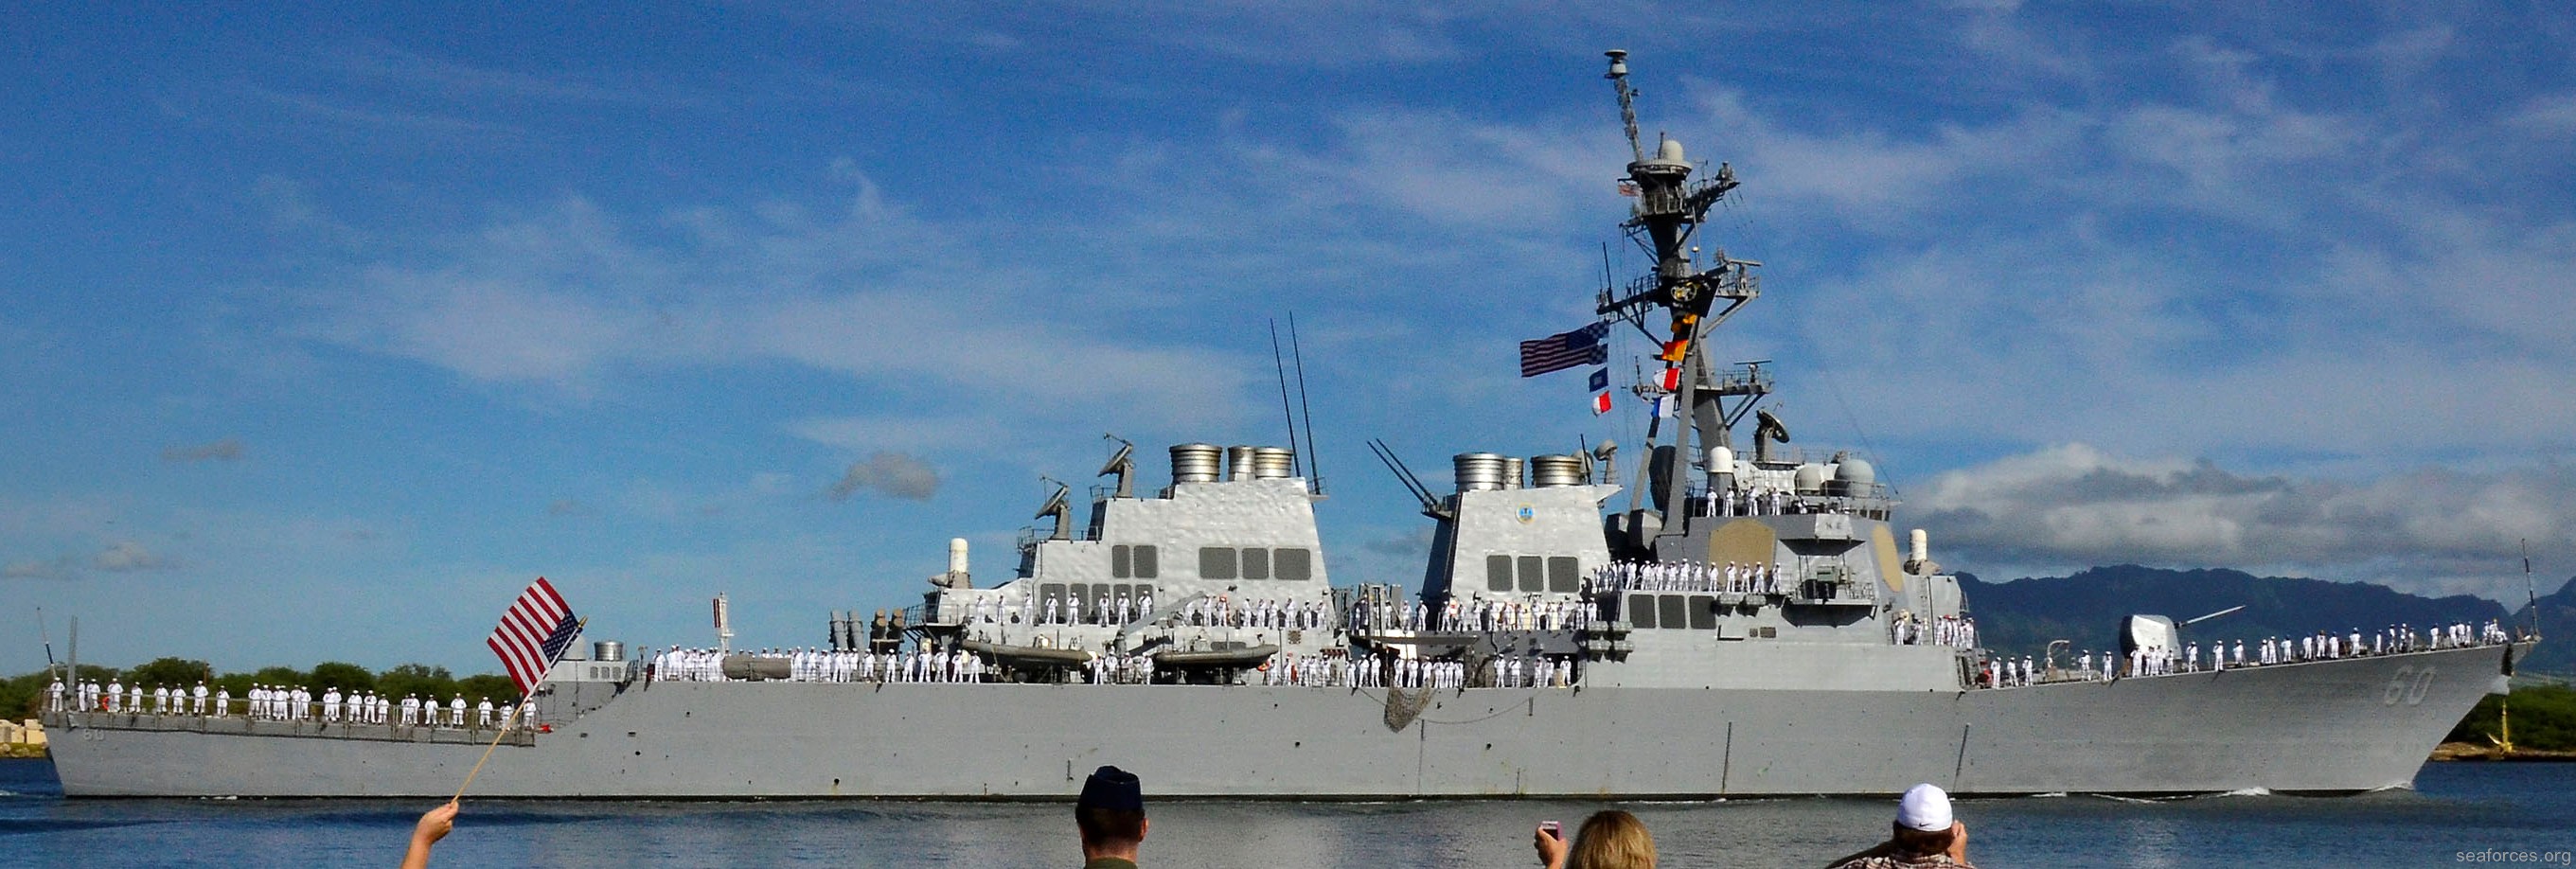 ddg-60 uss paul hamilton guided missile destroyer us navy 17